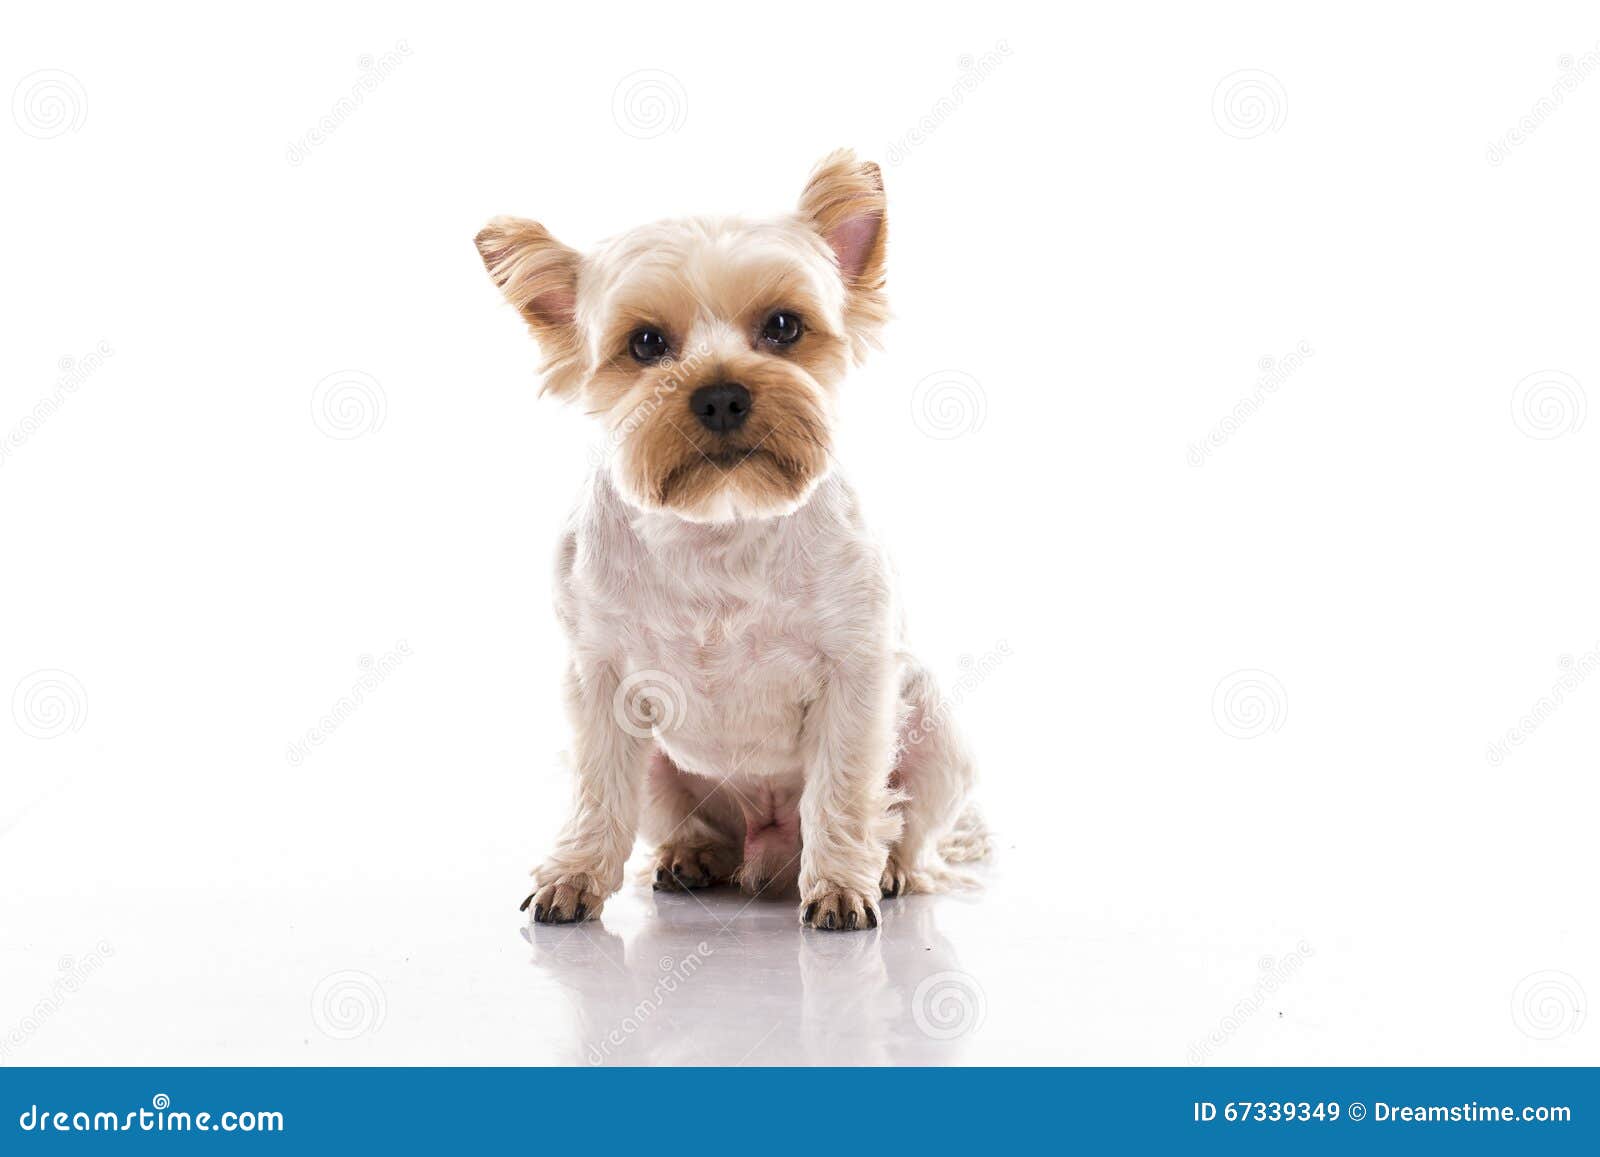 Cute Little Dog on a White Background Stock Image - Image of concepts